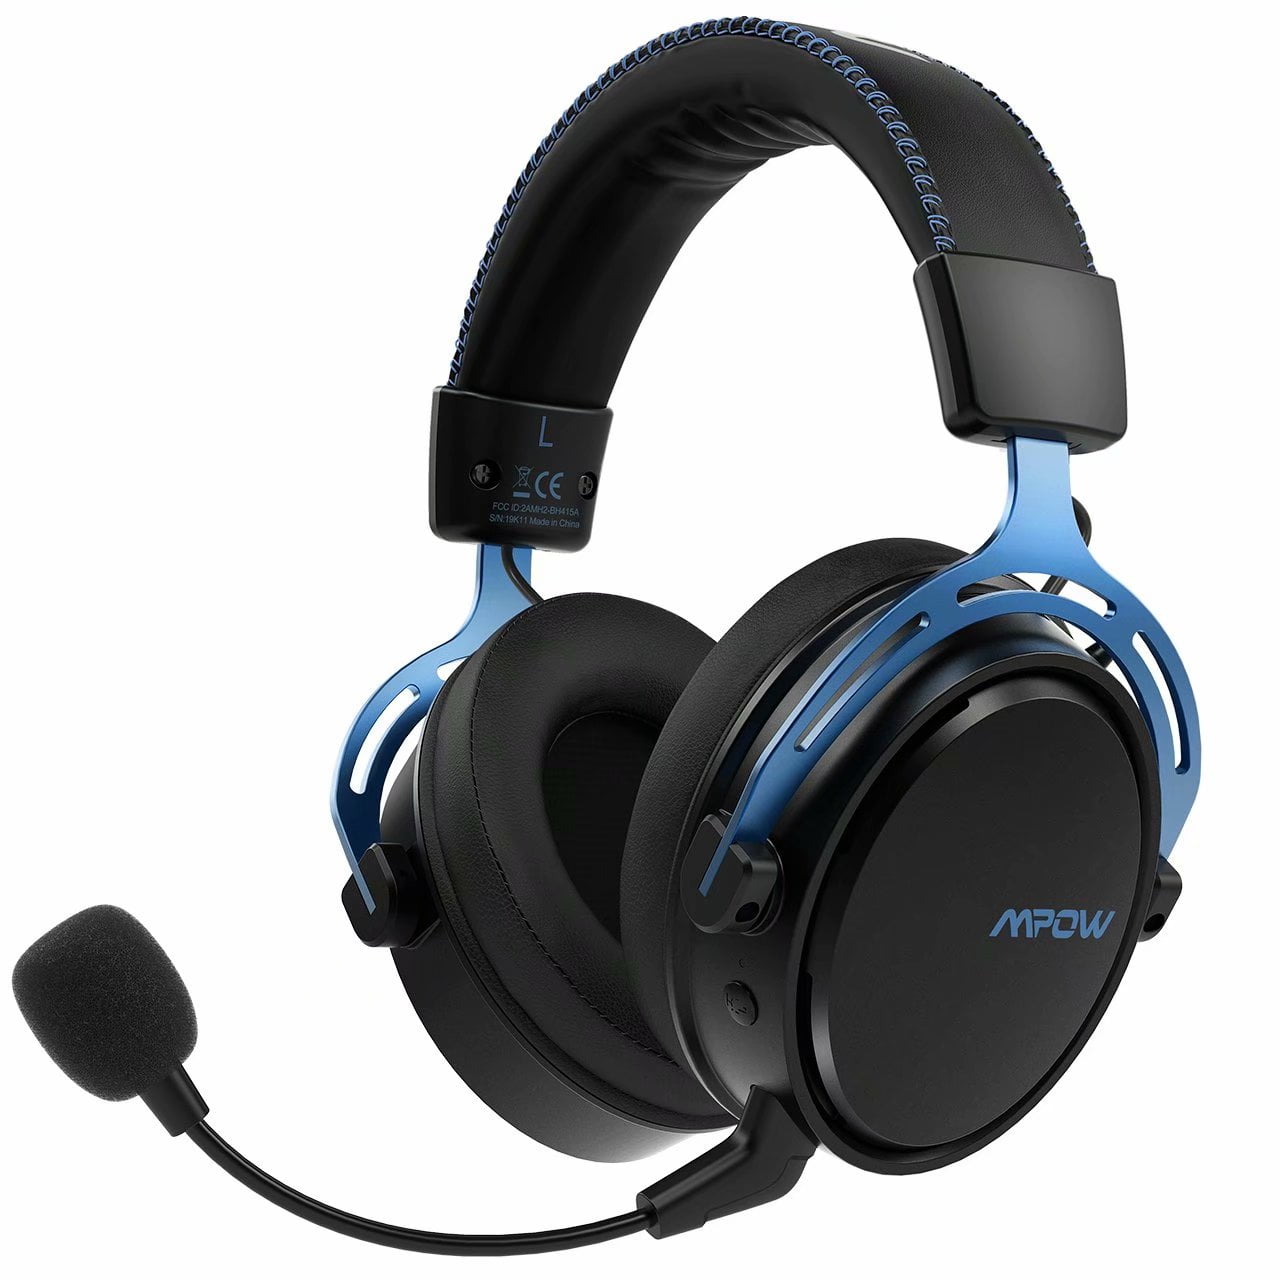 Mpow Gaming Headset for PS4, PC, Xbox One, Wireless Stereo Gaming Headset with Detachable Noise Cancelling Mic, Memory Foam, Premium Leatherette, Surround Sounds, USB Transmitter Included, PC, Switch